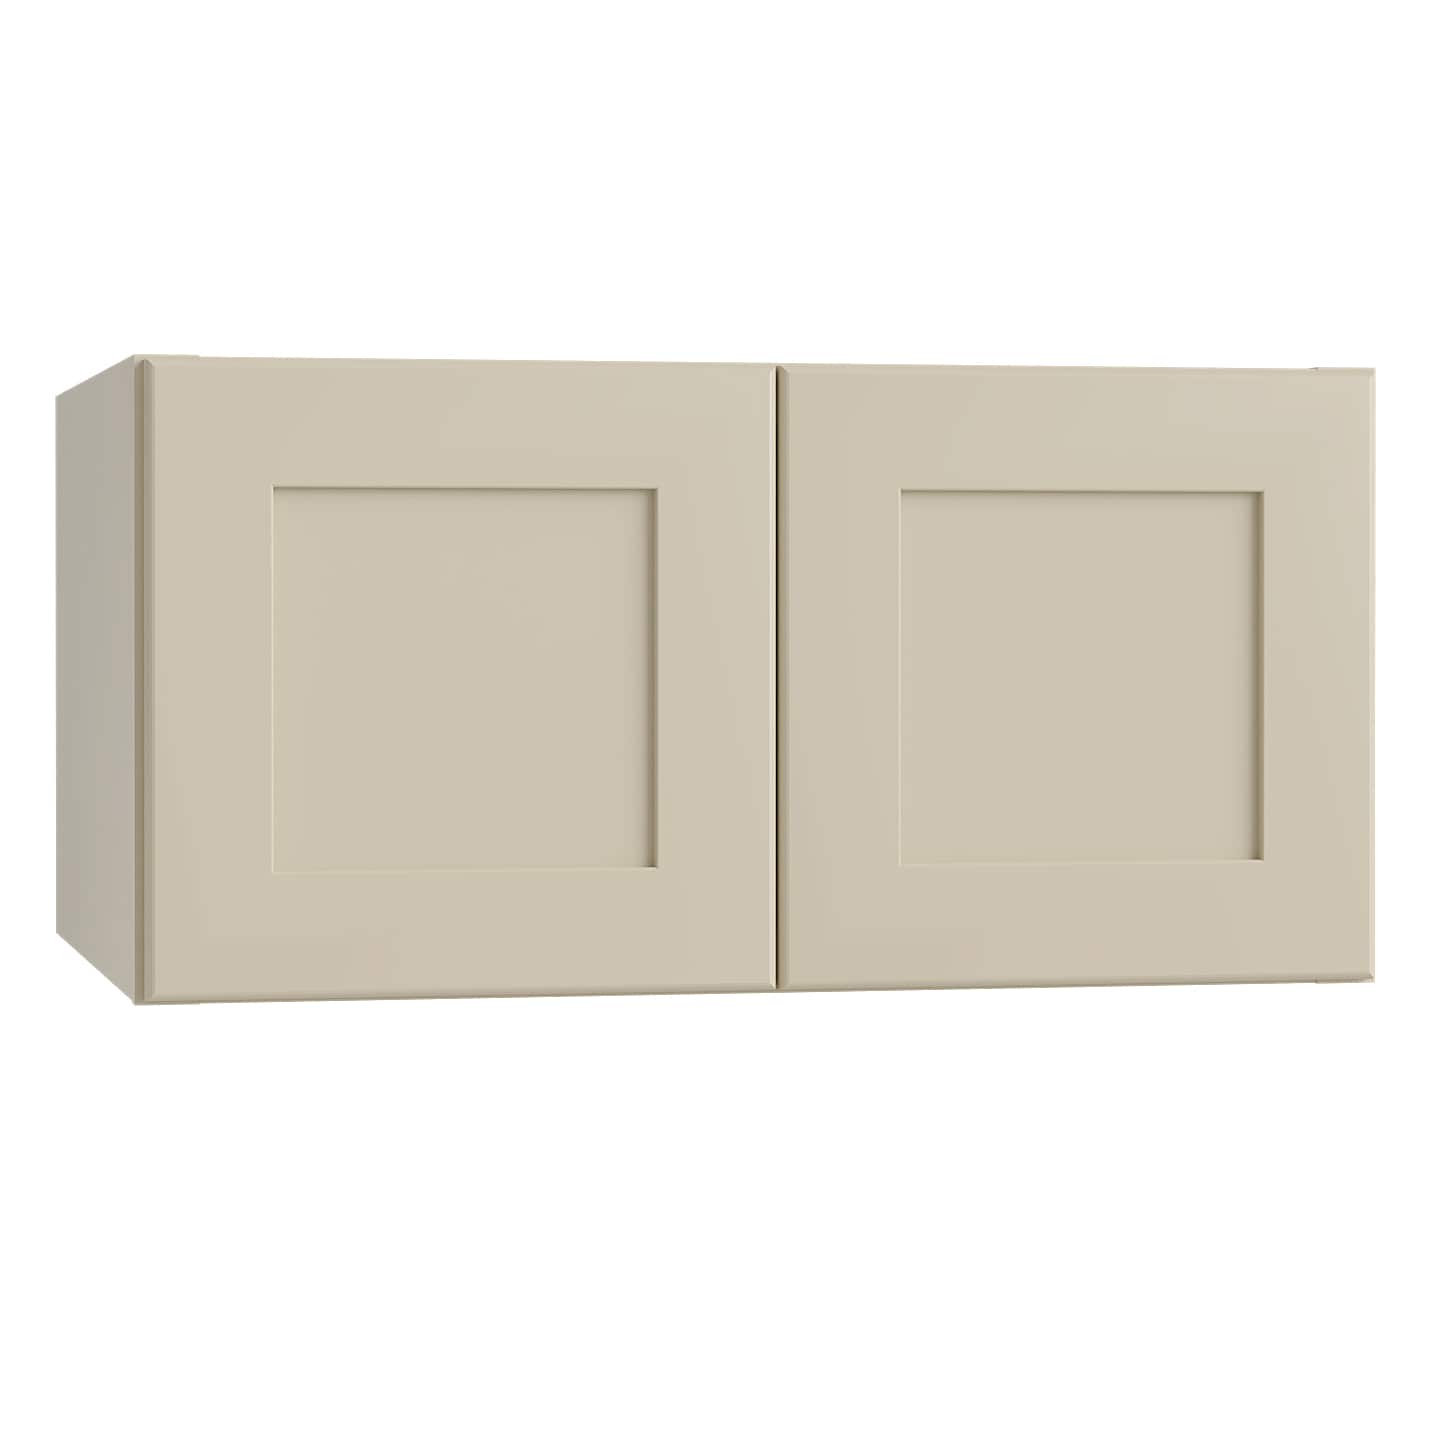 Luxxe Cabinetry 36-in W x 12-in H x 24-in D Norfolk Blended Cream Painted Door Wall Fully Assembled Semi-custom Cabinet in Off-White | W362412-NBC